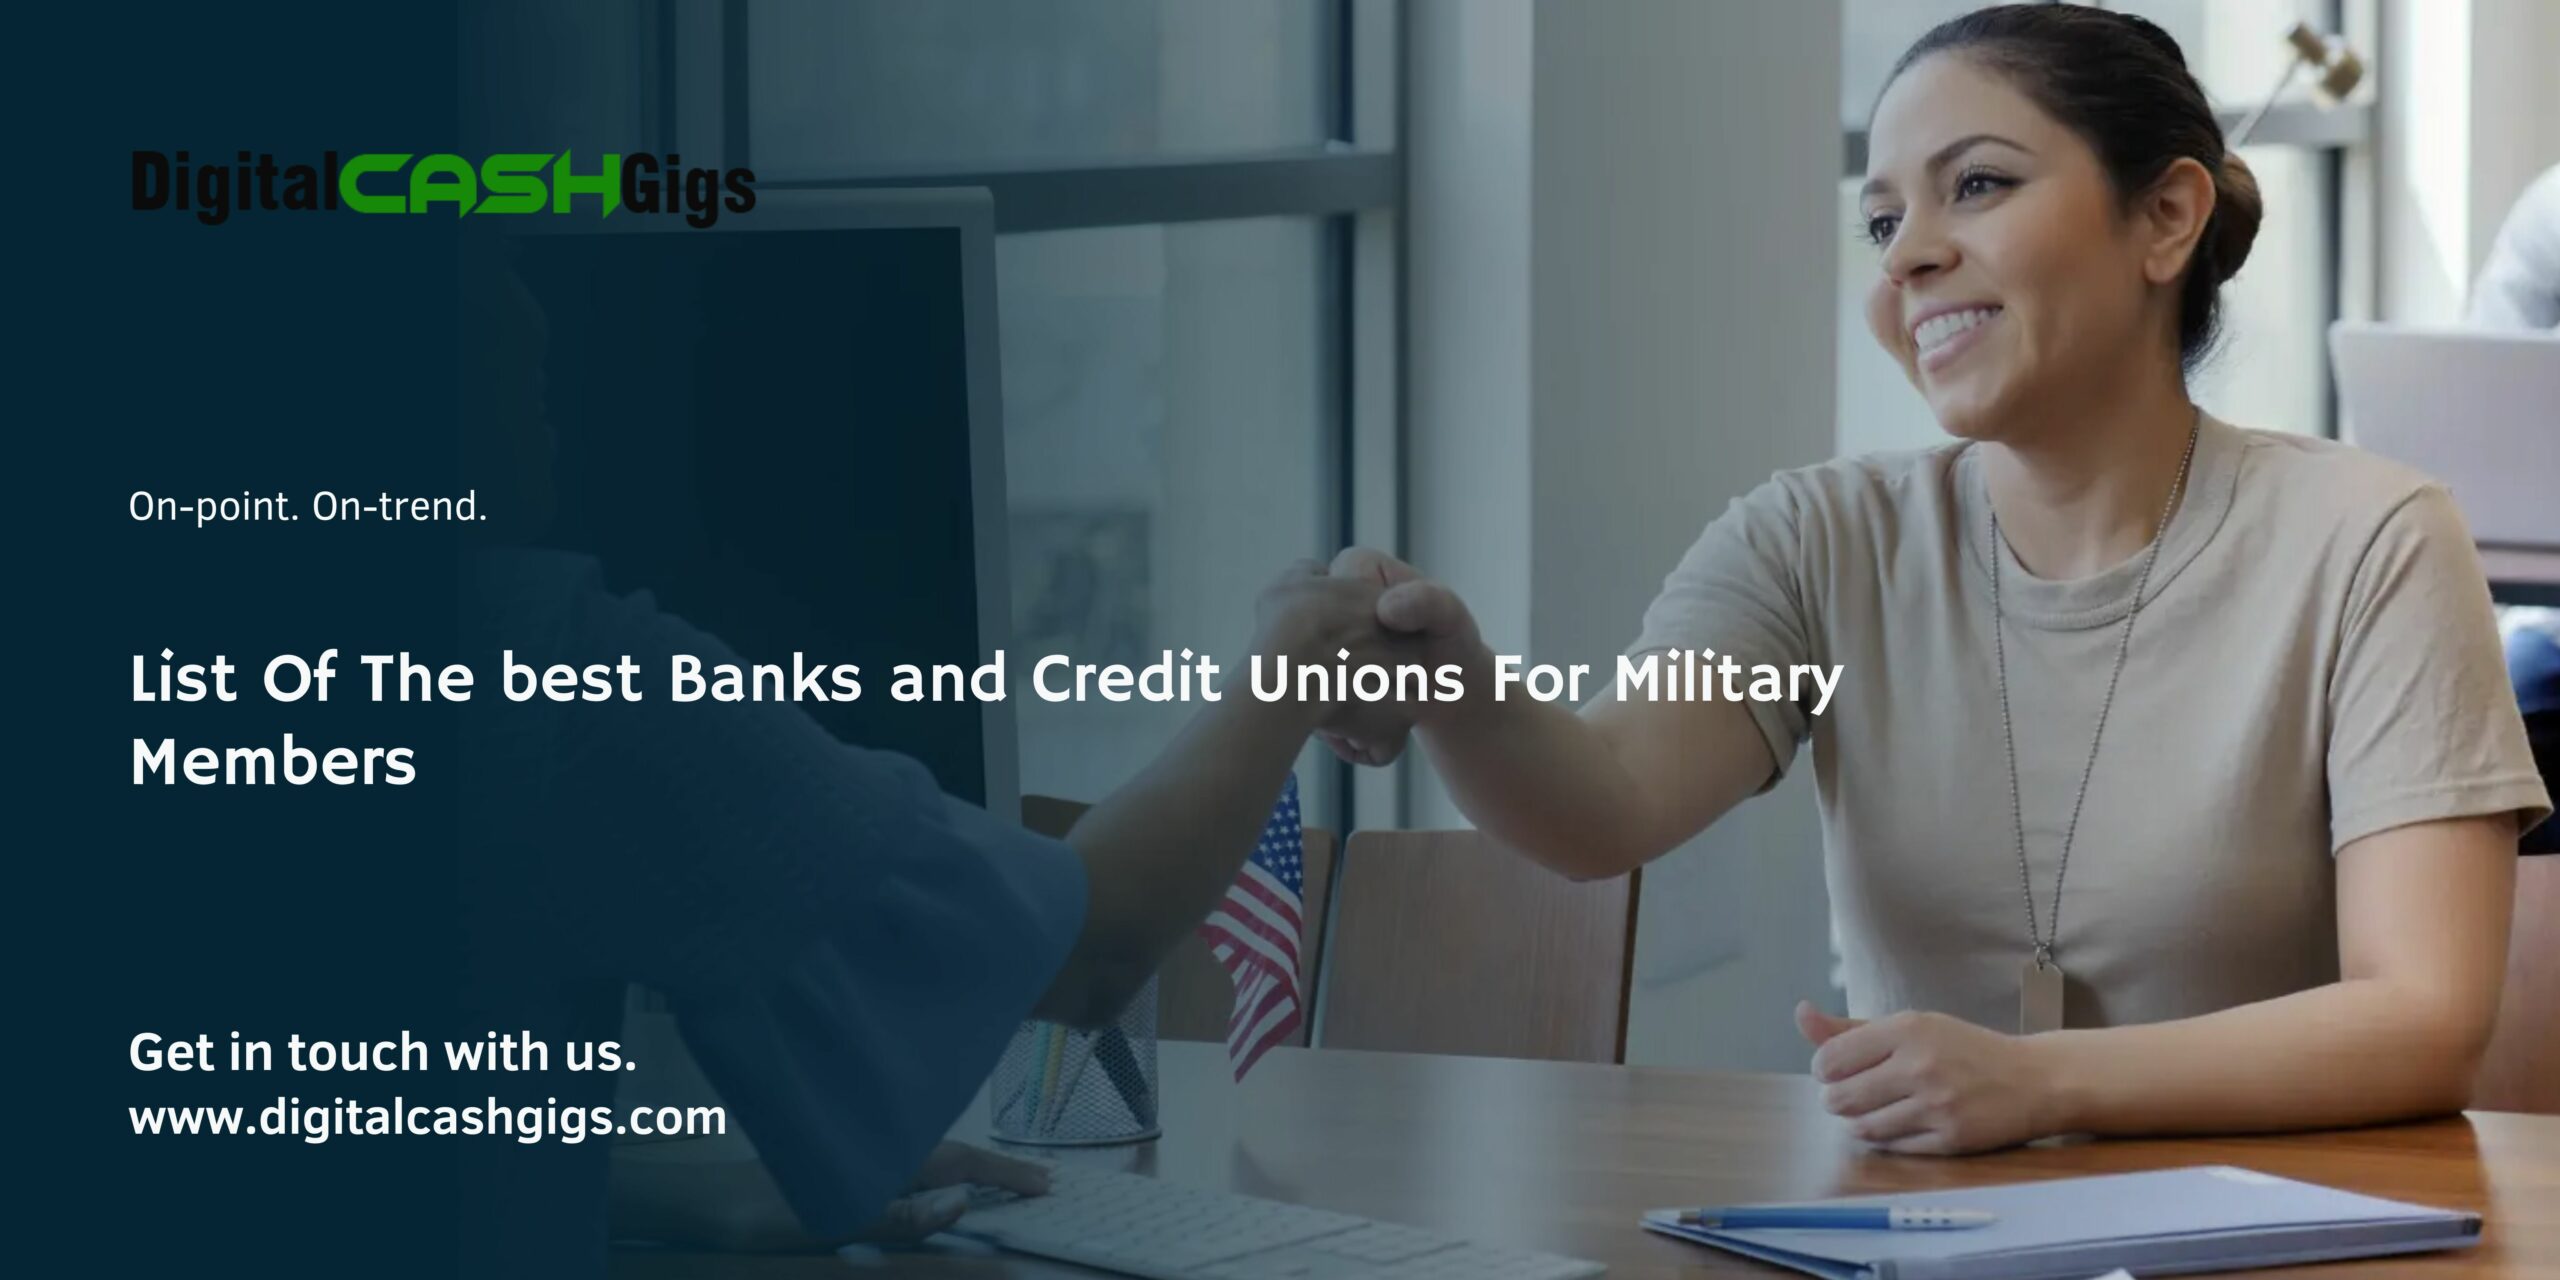 List Of The best Banks and Credit Unions For Military Members